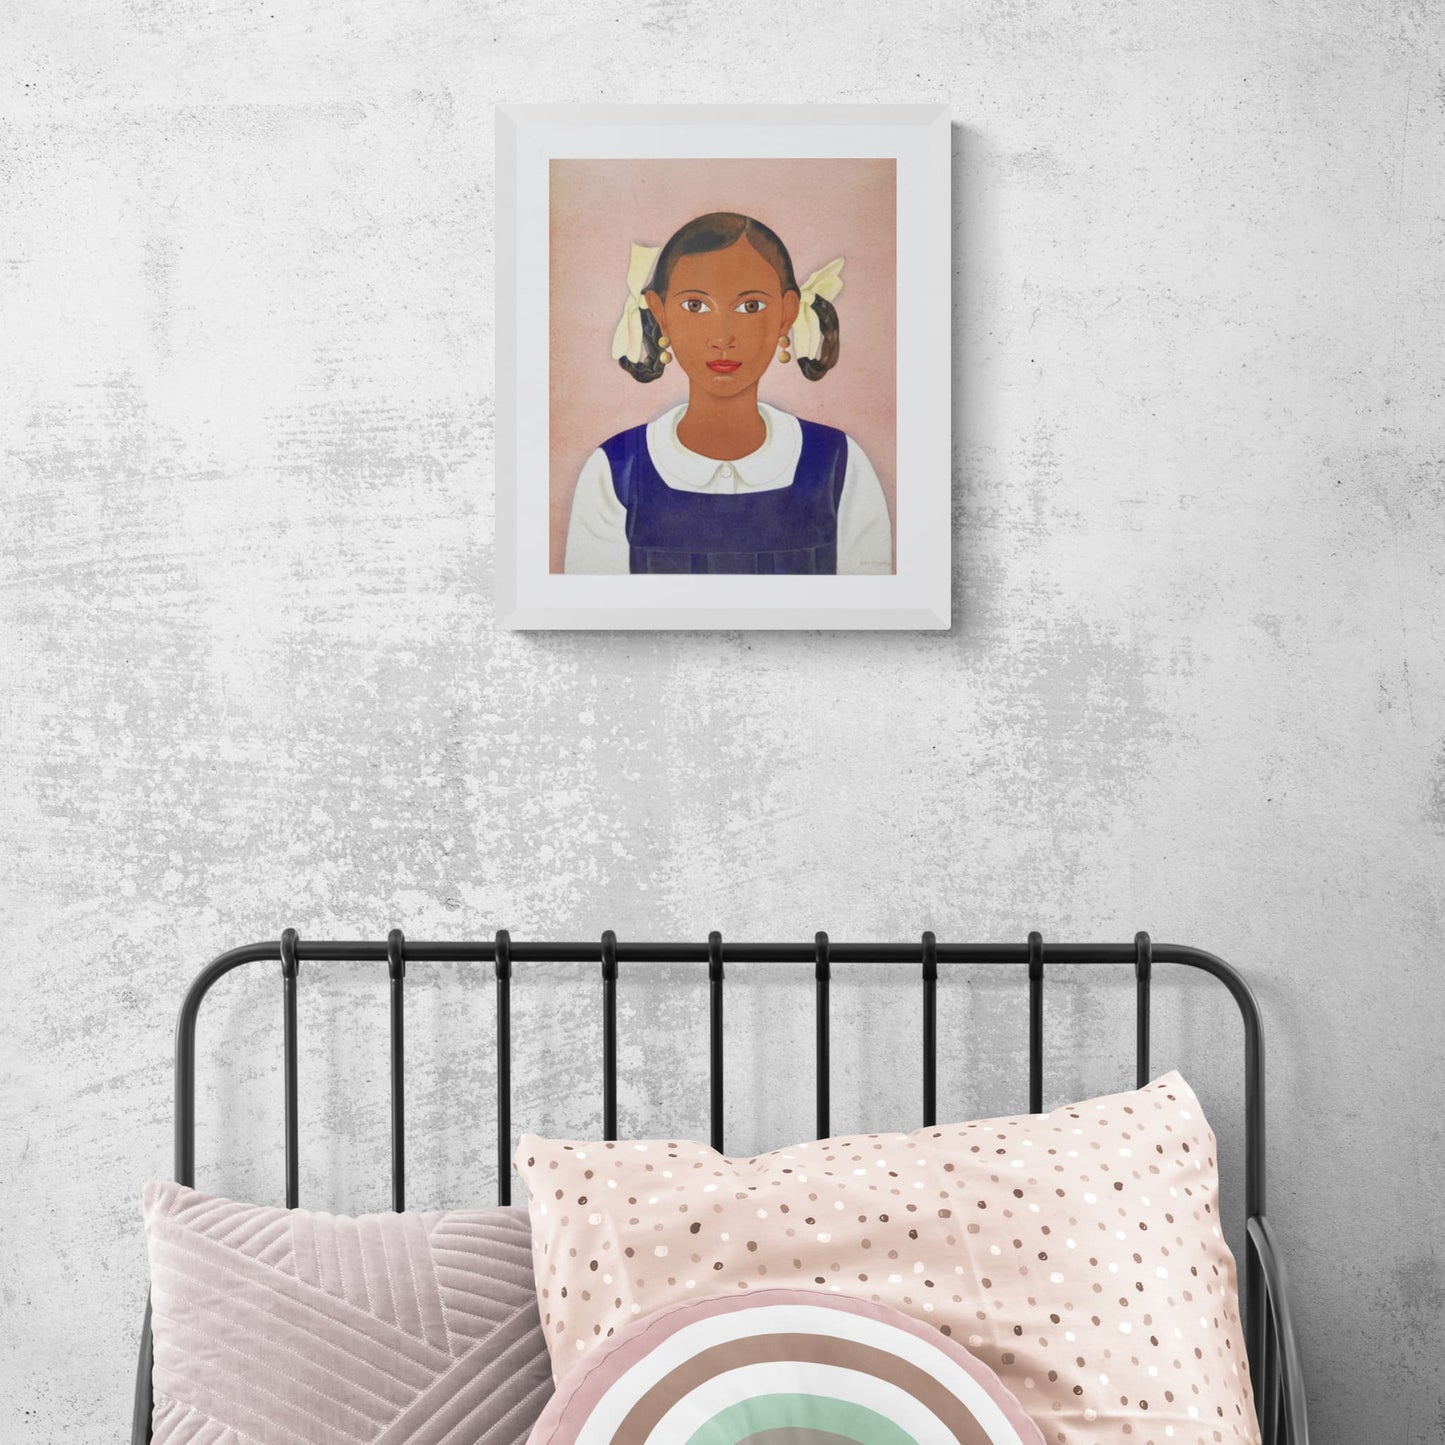 Portrait of a school girl by Rital Angus hanging above bed